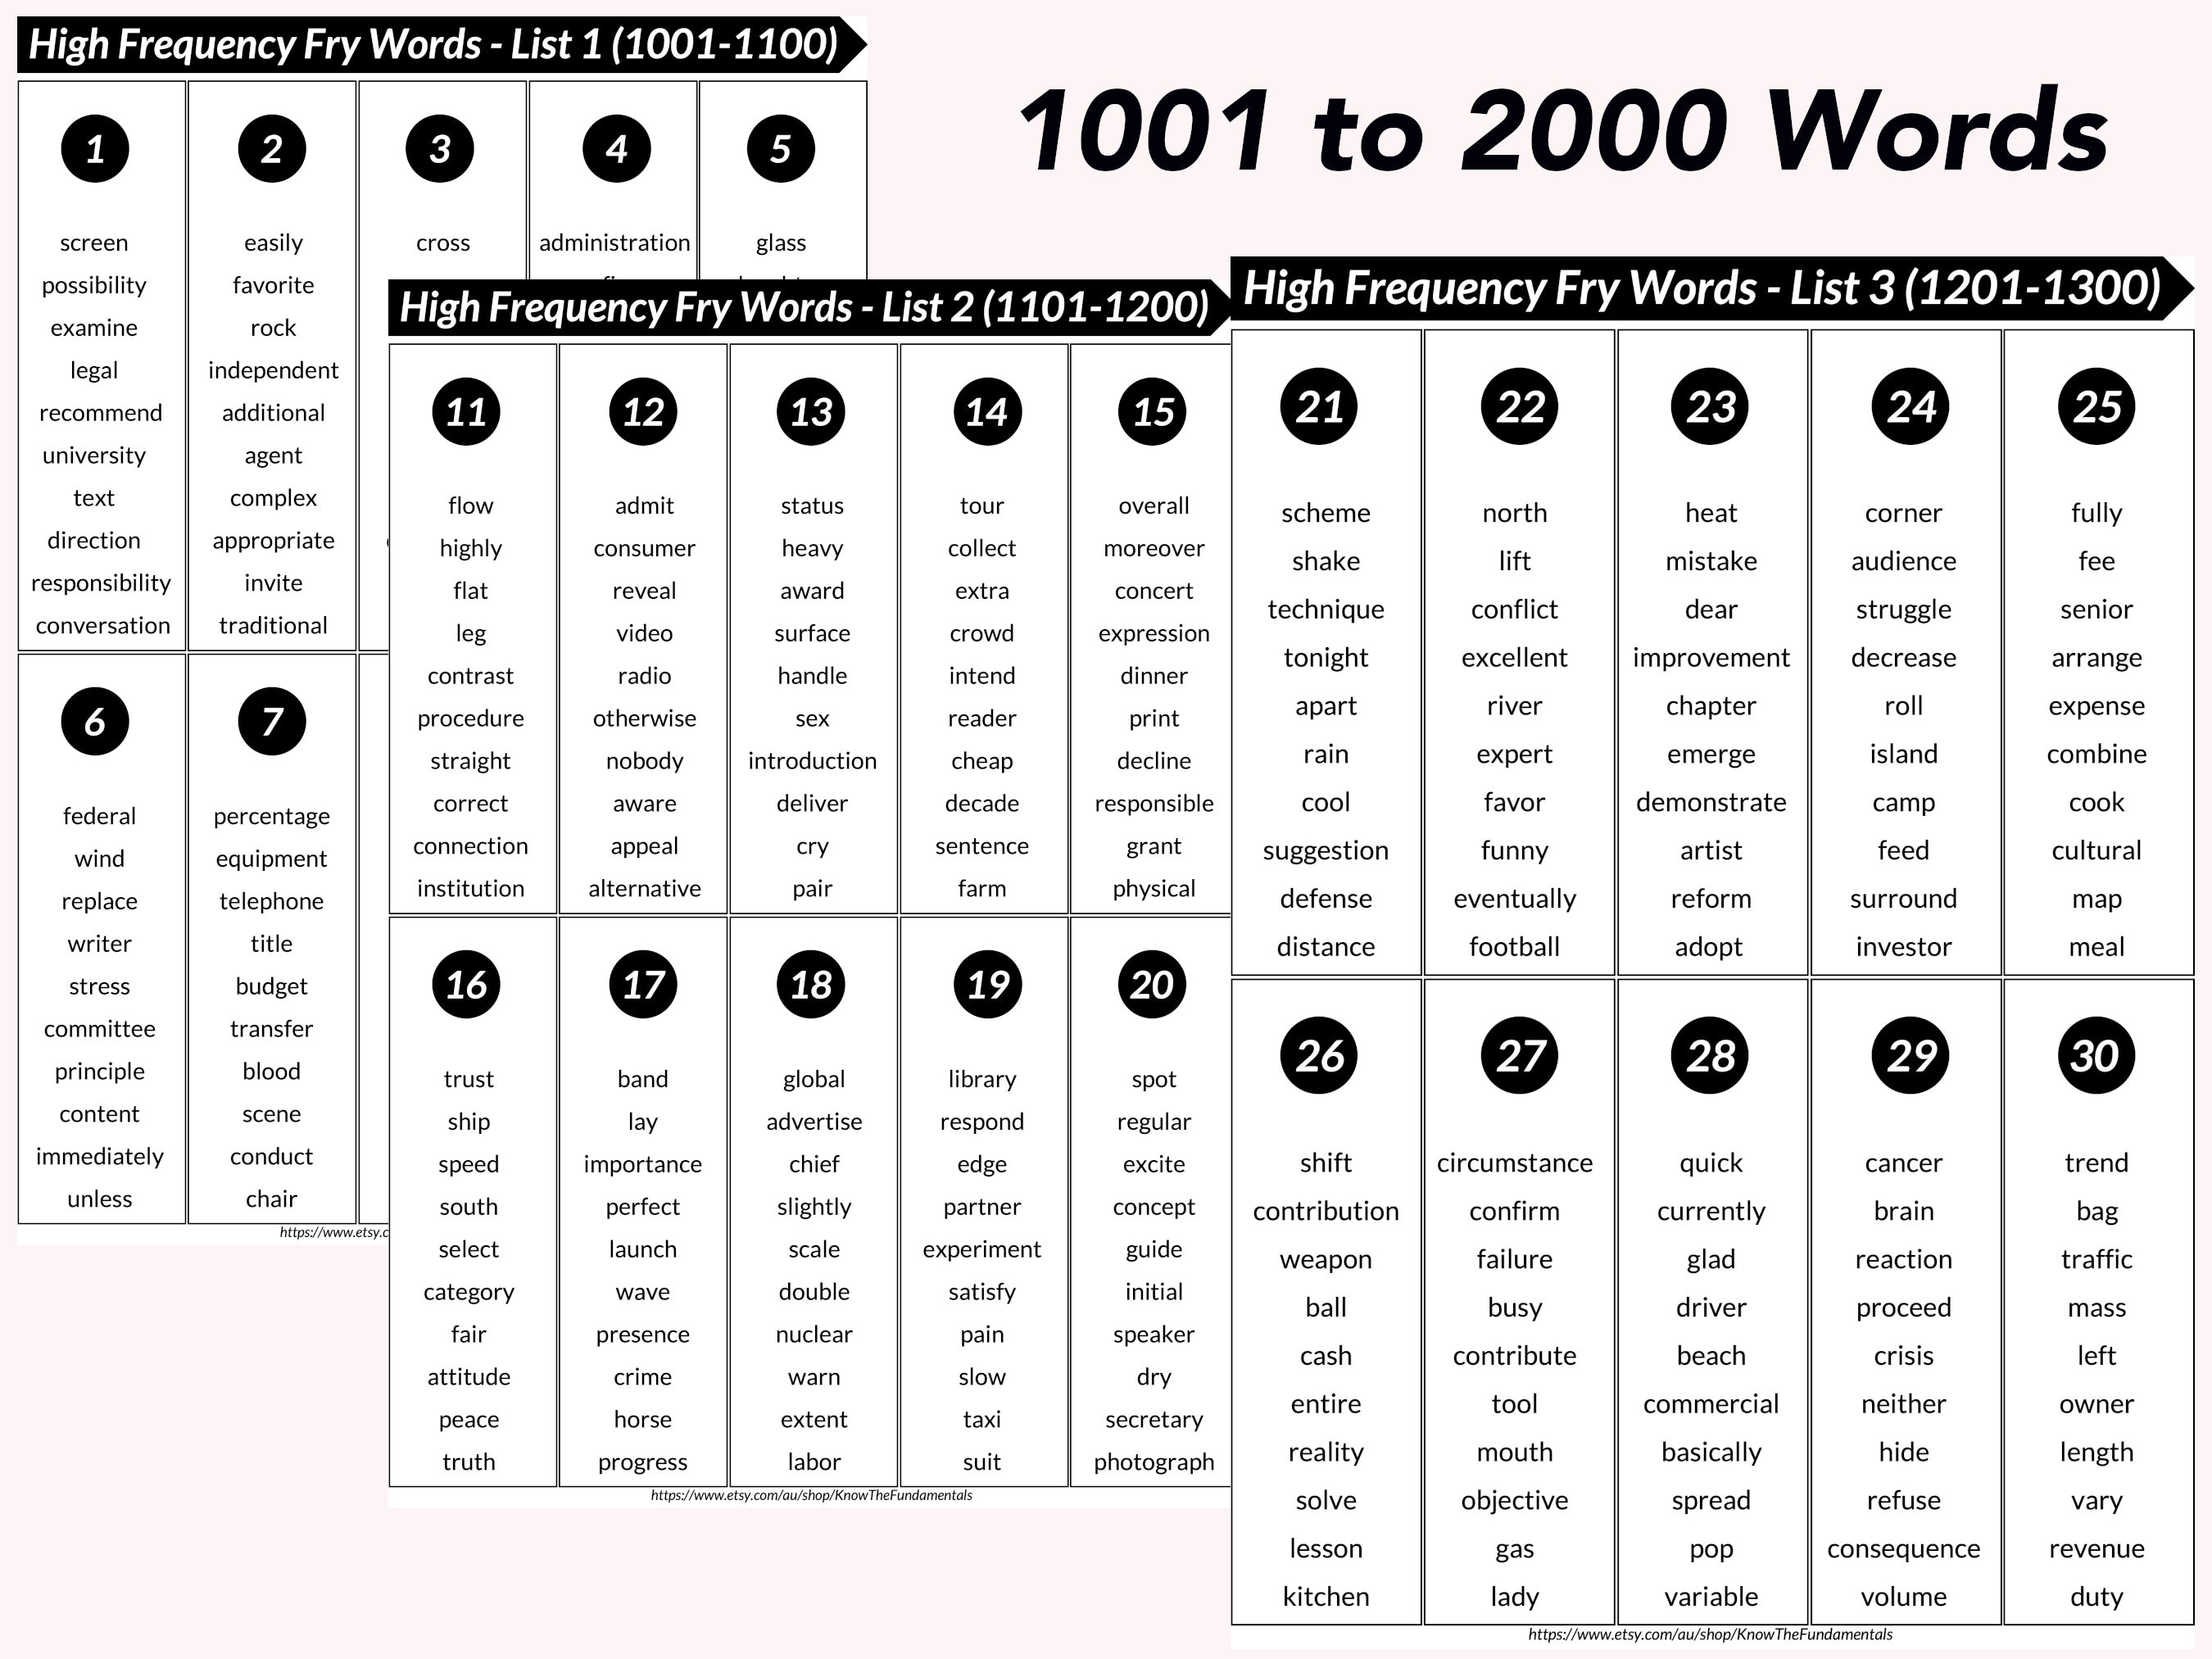 Numbers in words 1001 to 2000 // Numbers 1001 to 2000 